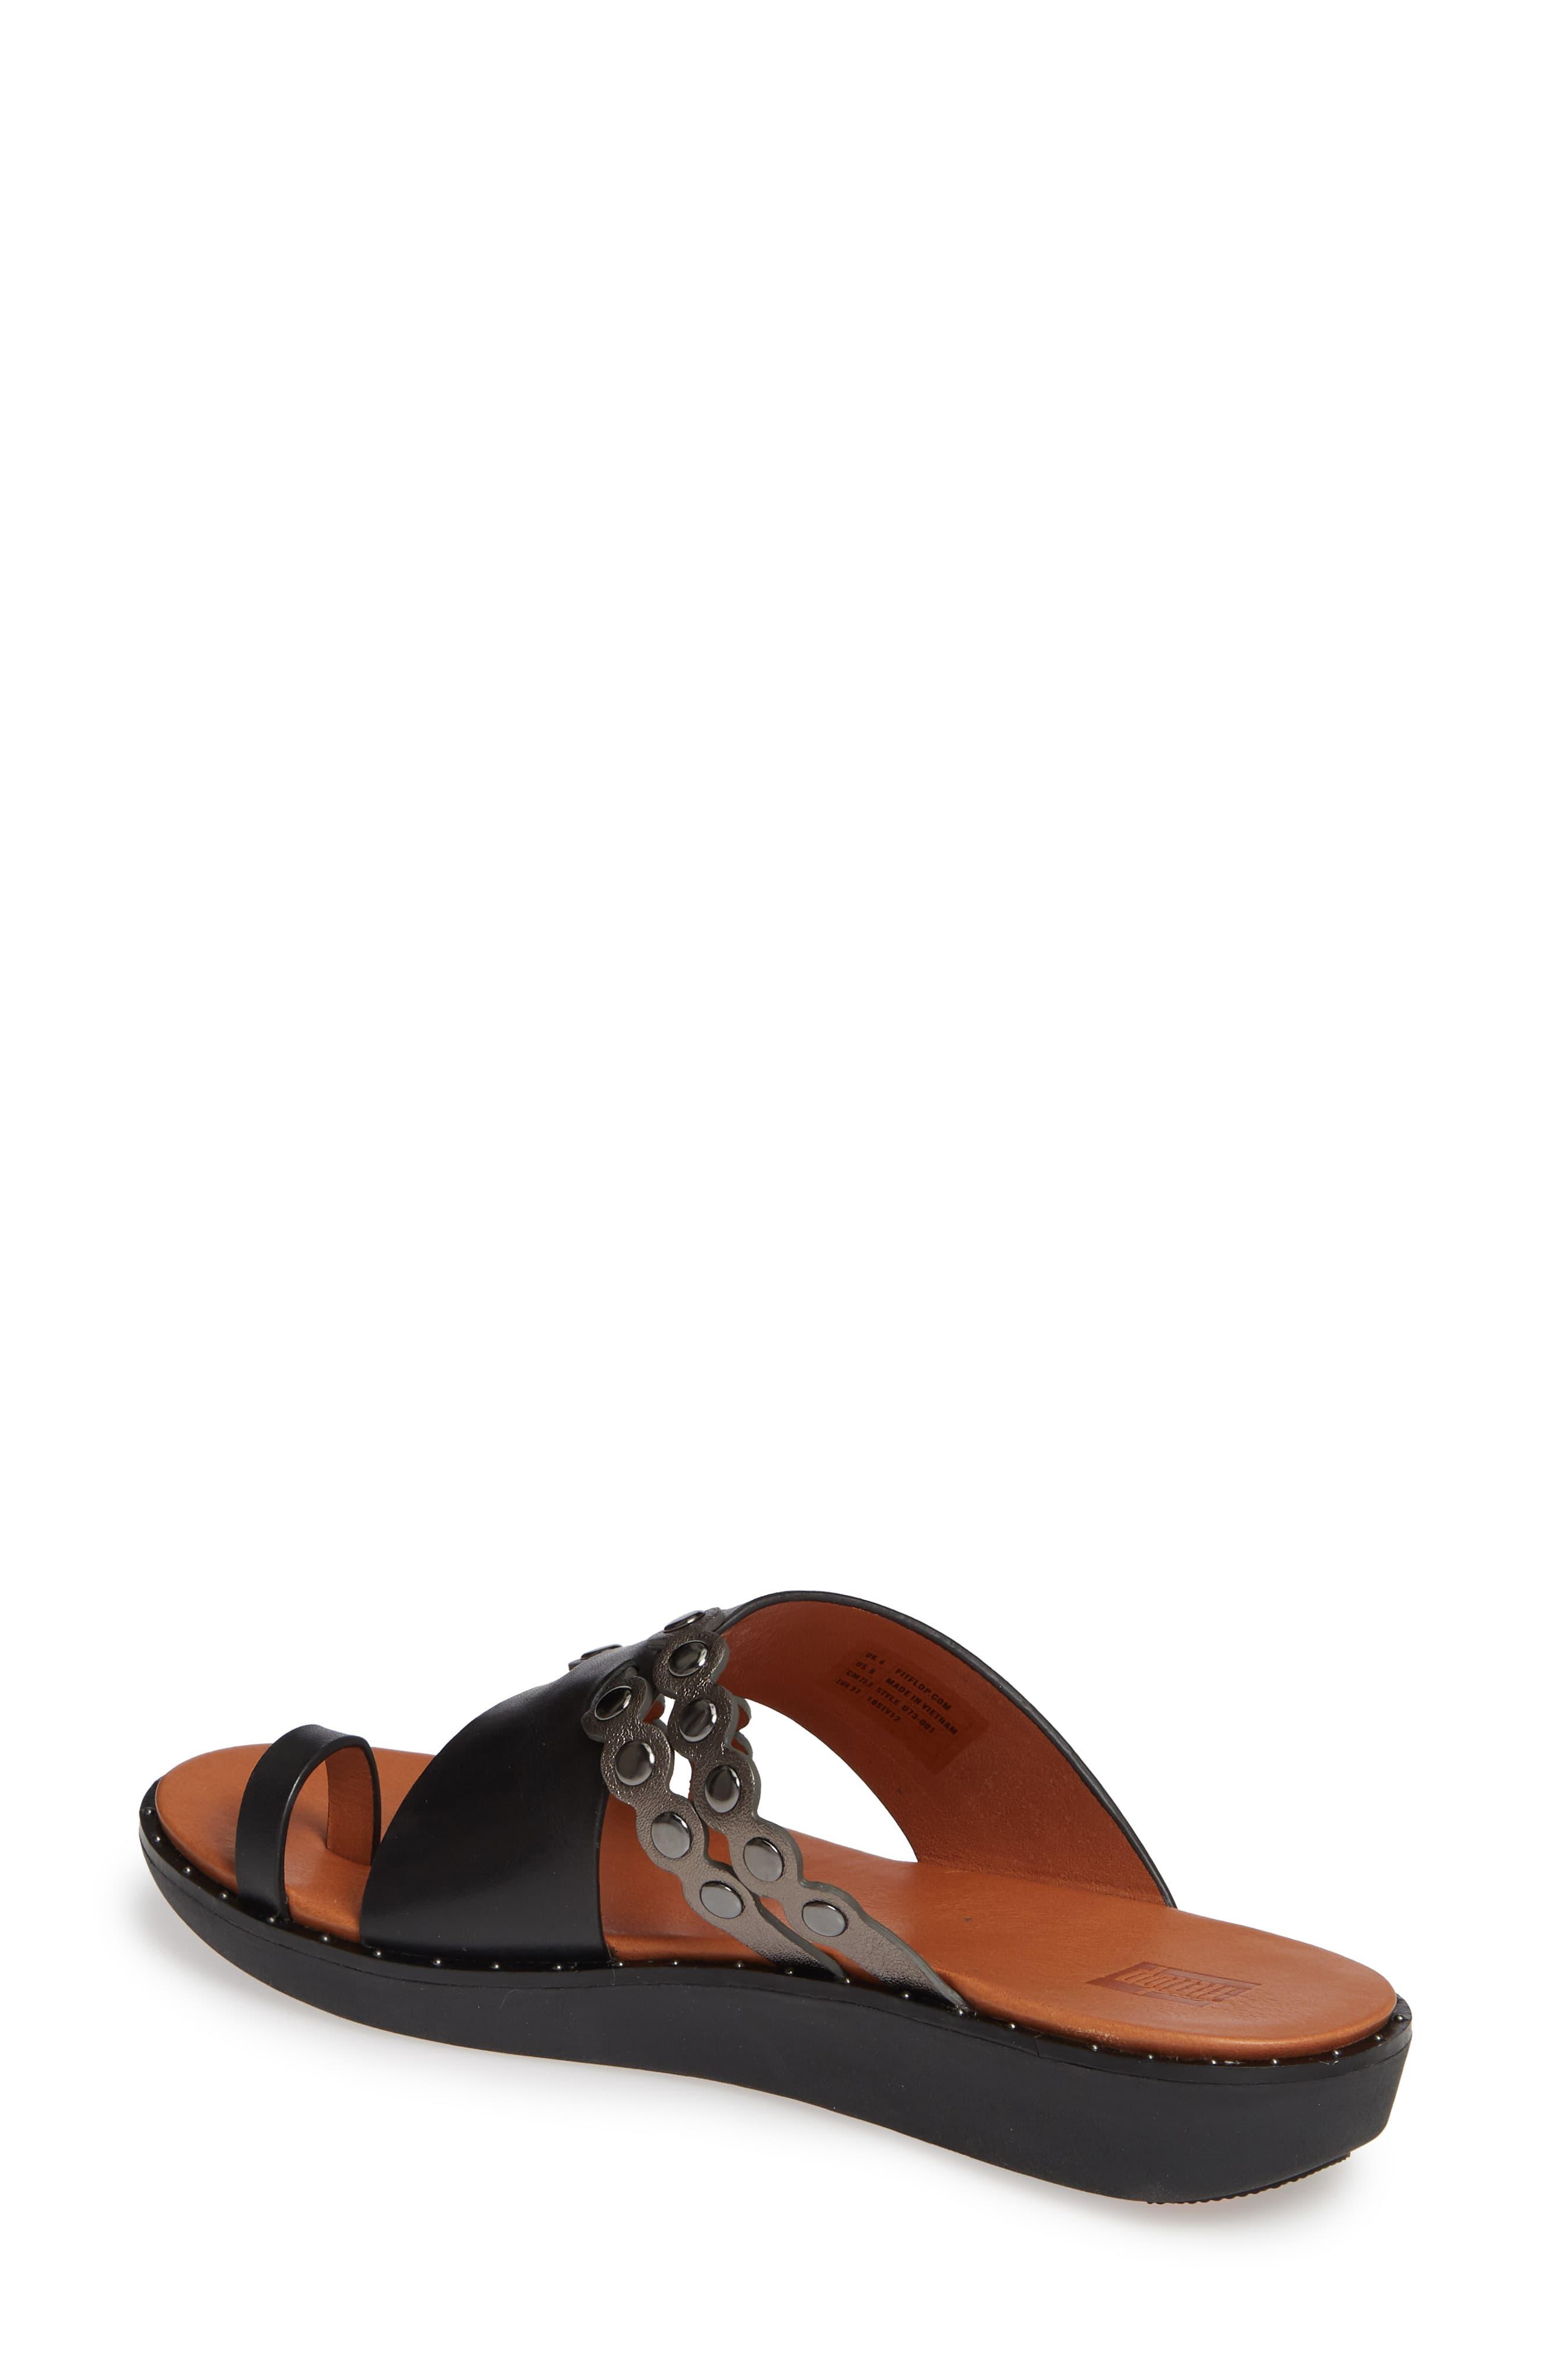 fitflop scallop leather slides